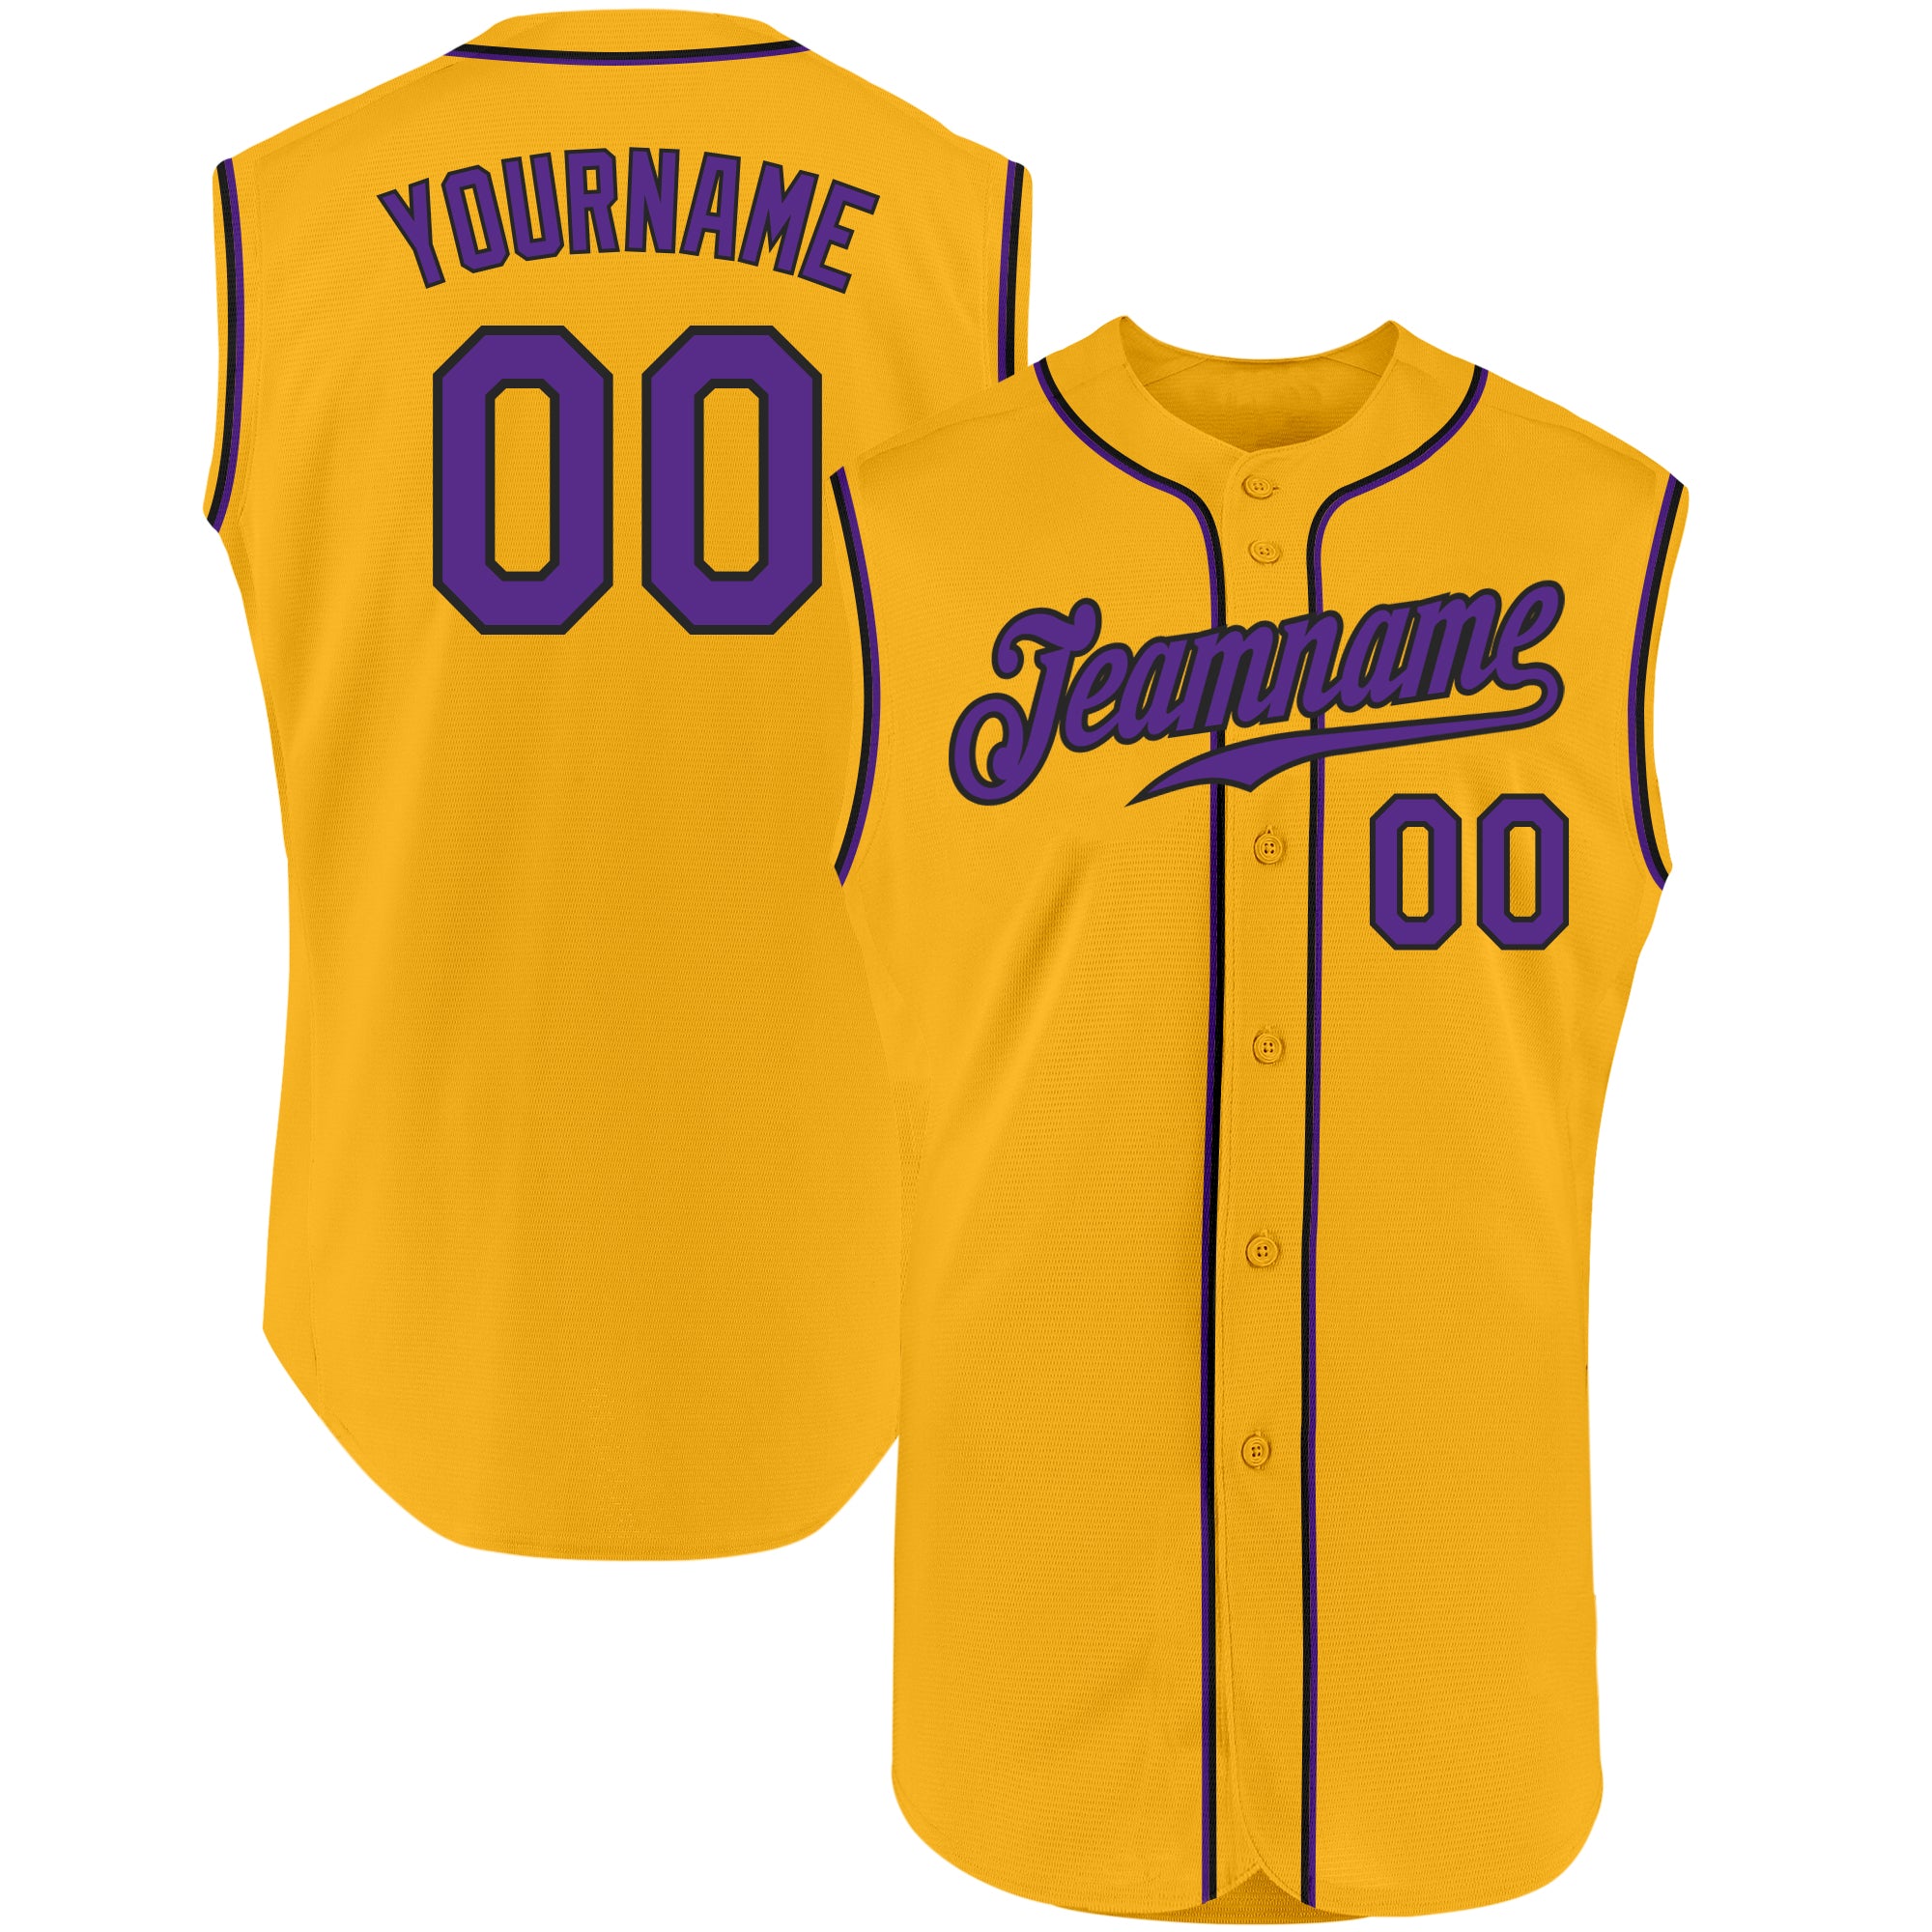 Los Angeles Lakers Baseball Custom Jersey - All Stitched